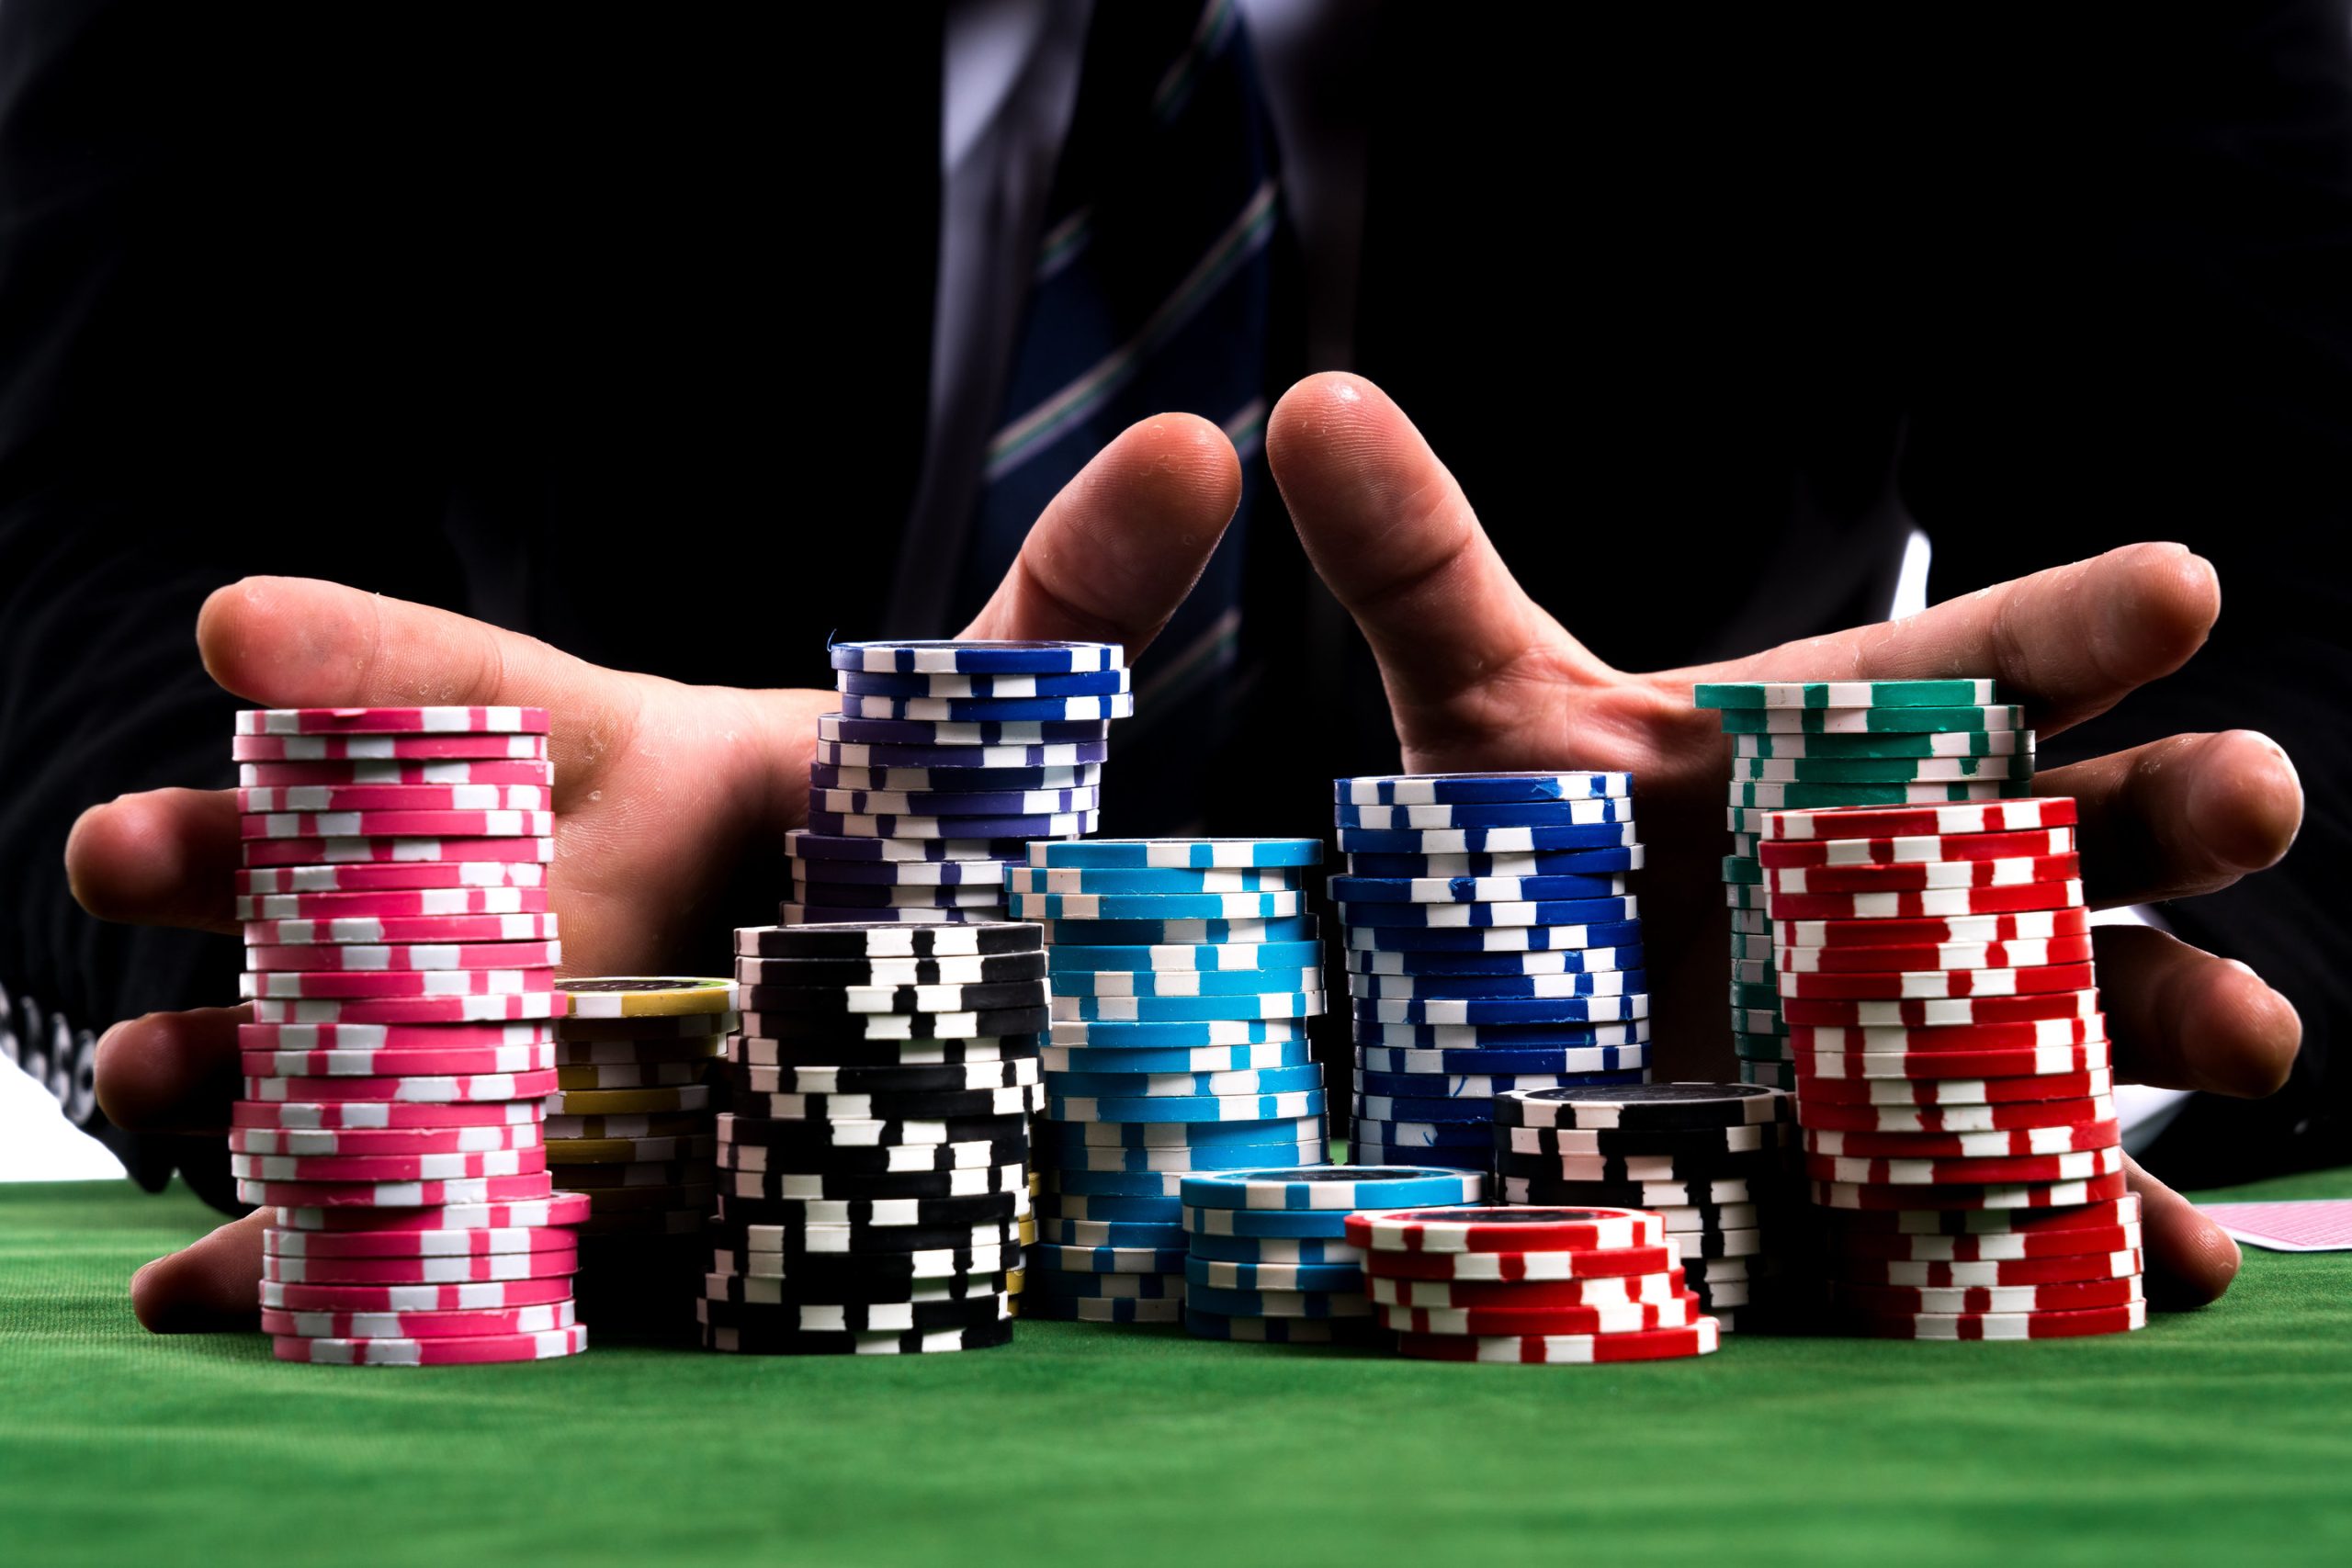 Maximize Your Winnings - Strategies and Tactics for Online Casino Games